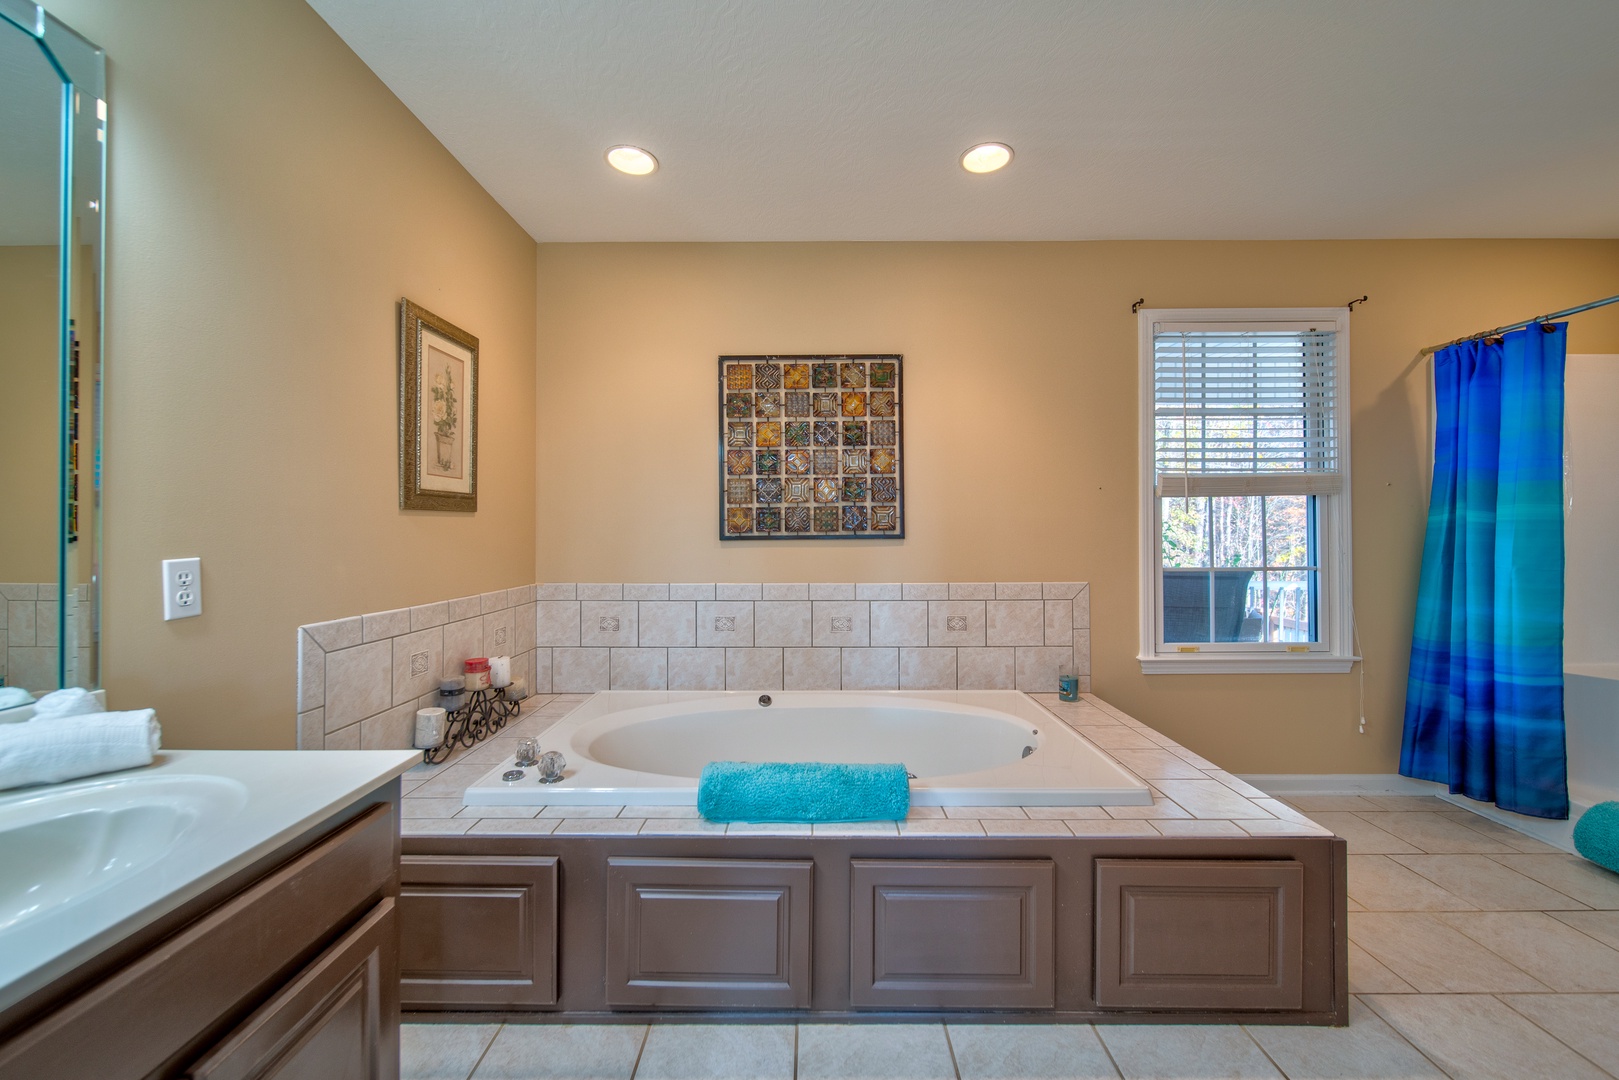 The master ensuite offers a jetted tub, standalone shower, & dual vanities